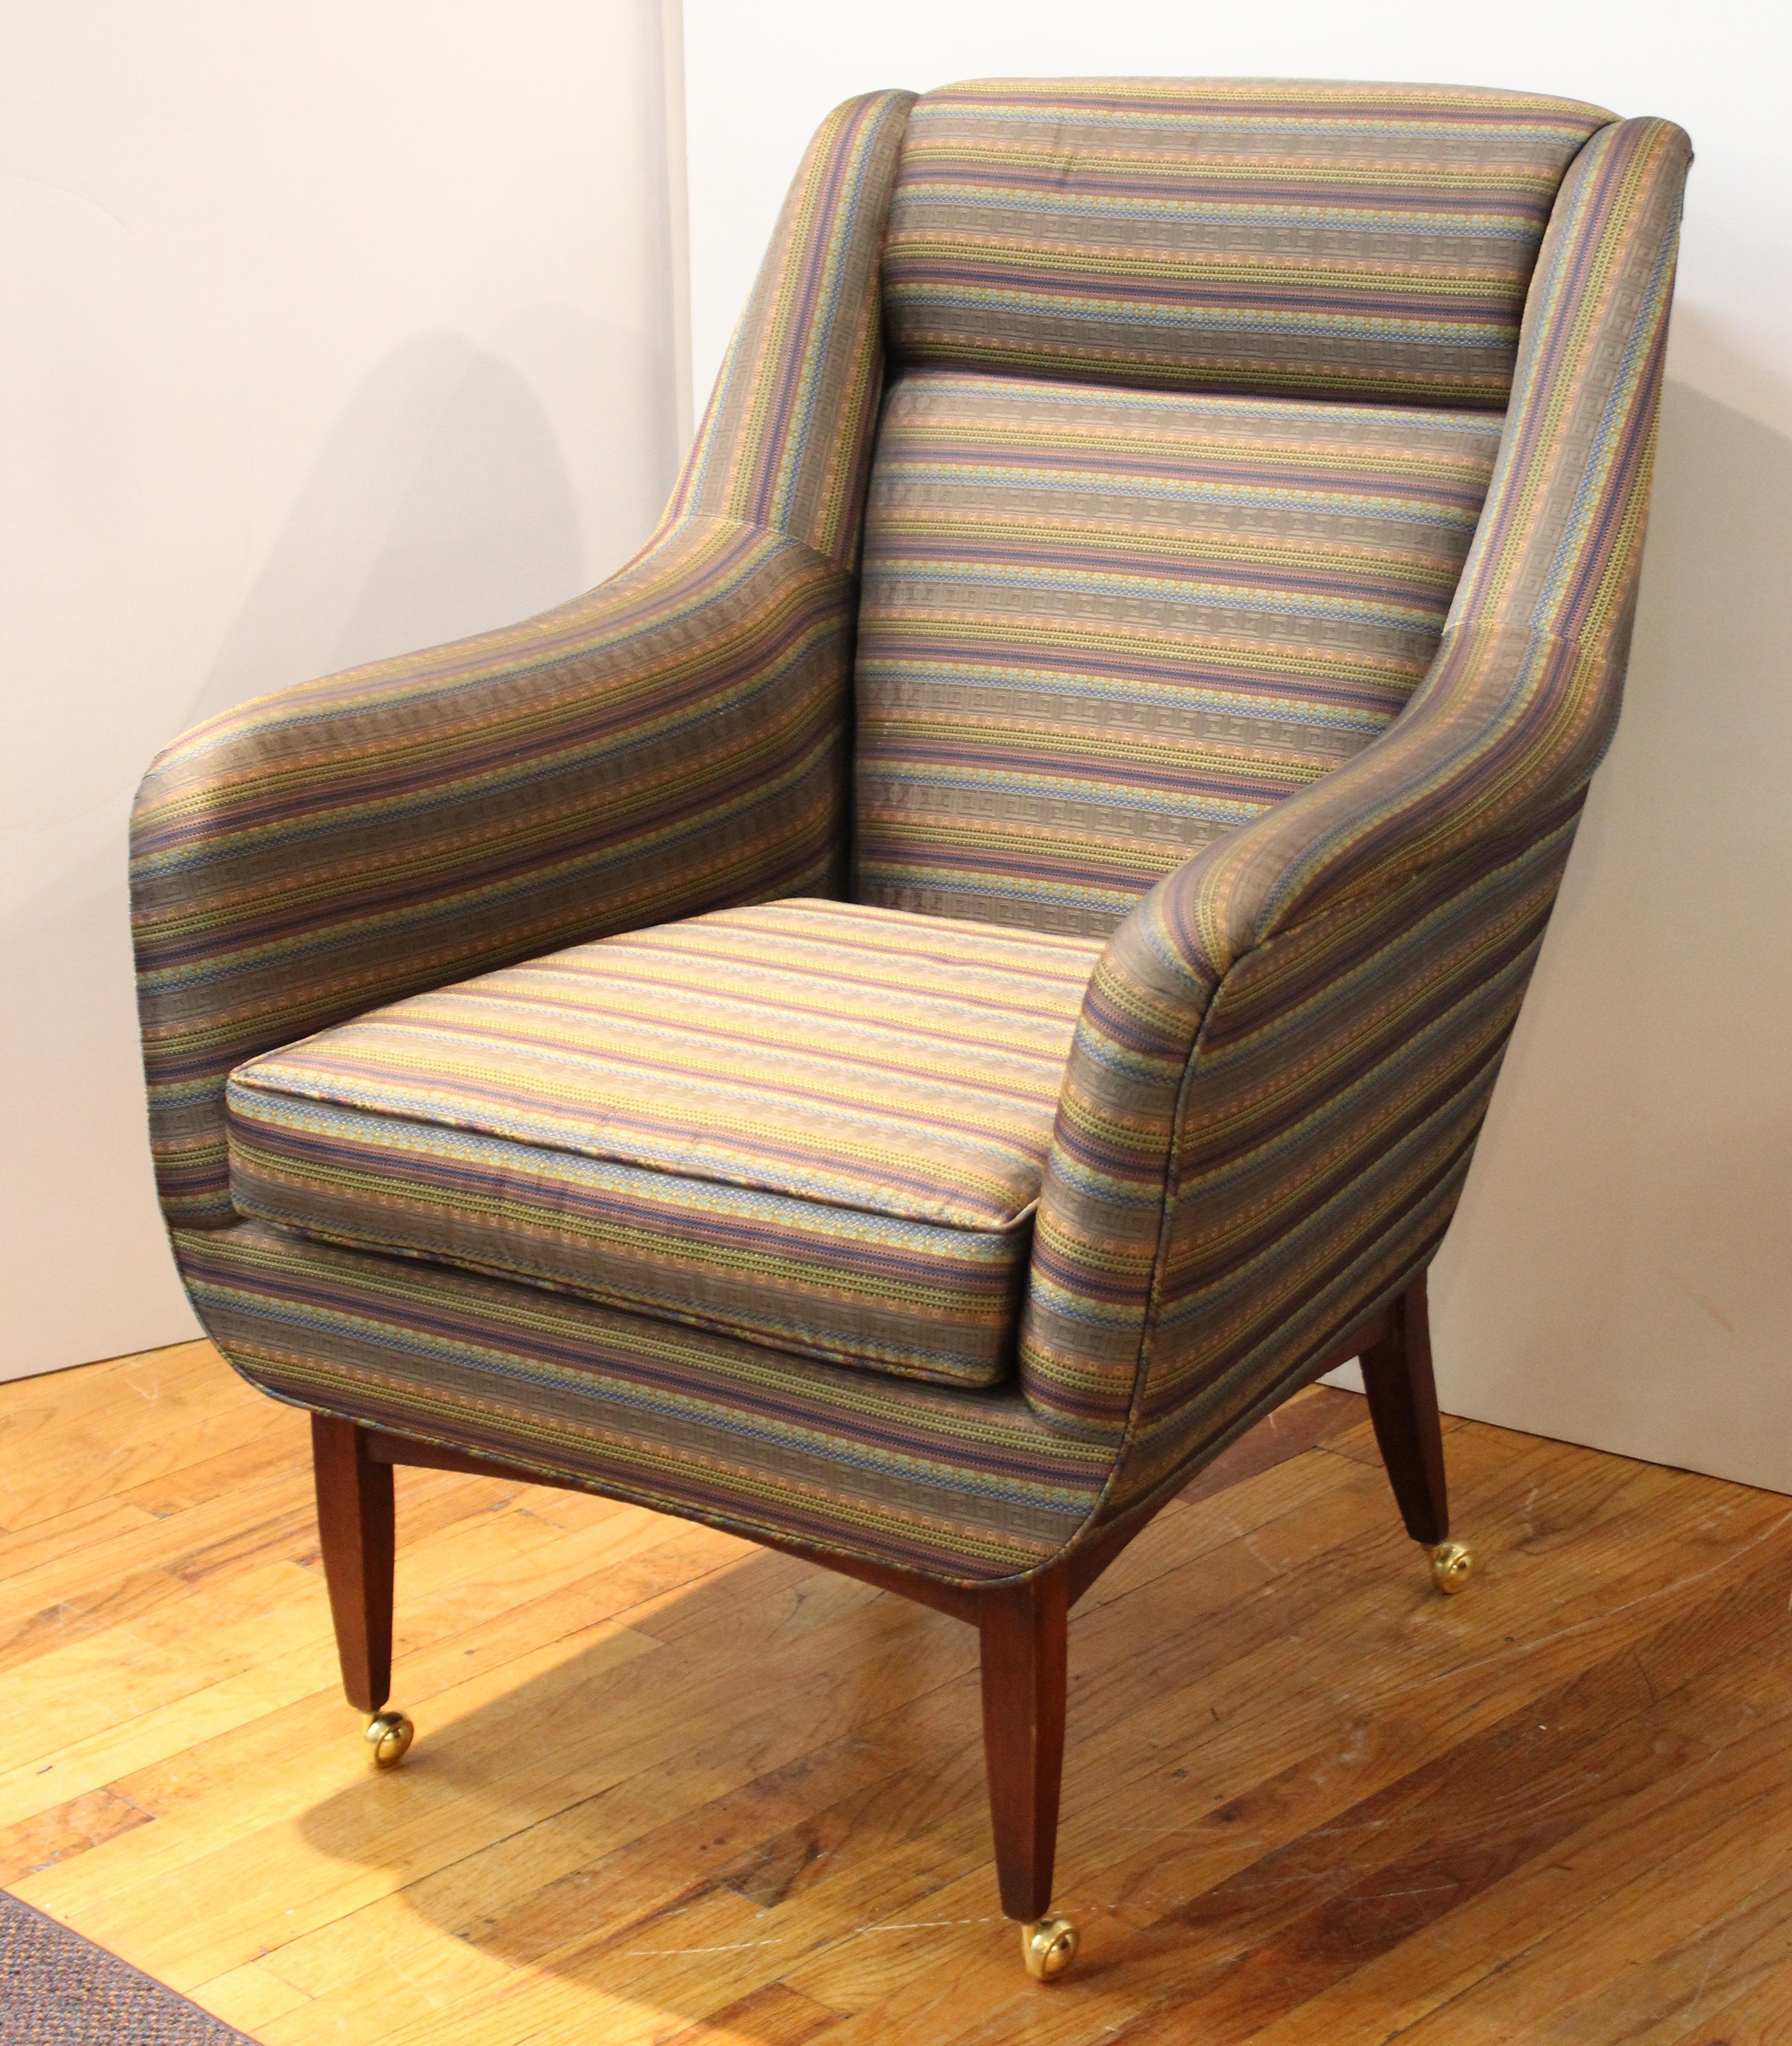 Mid-Century Modern lounge chair or armchair with matching foot stool on casters with decorative geometric pattern upholstery. The pair is in great vintage condition with age-appropriate wear.